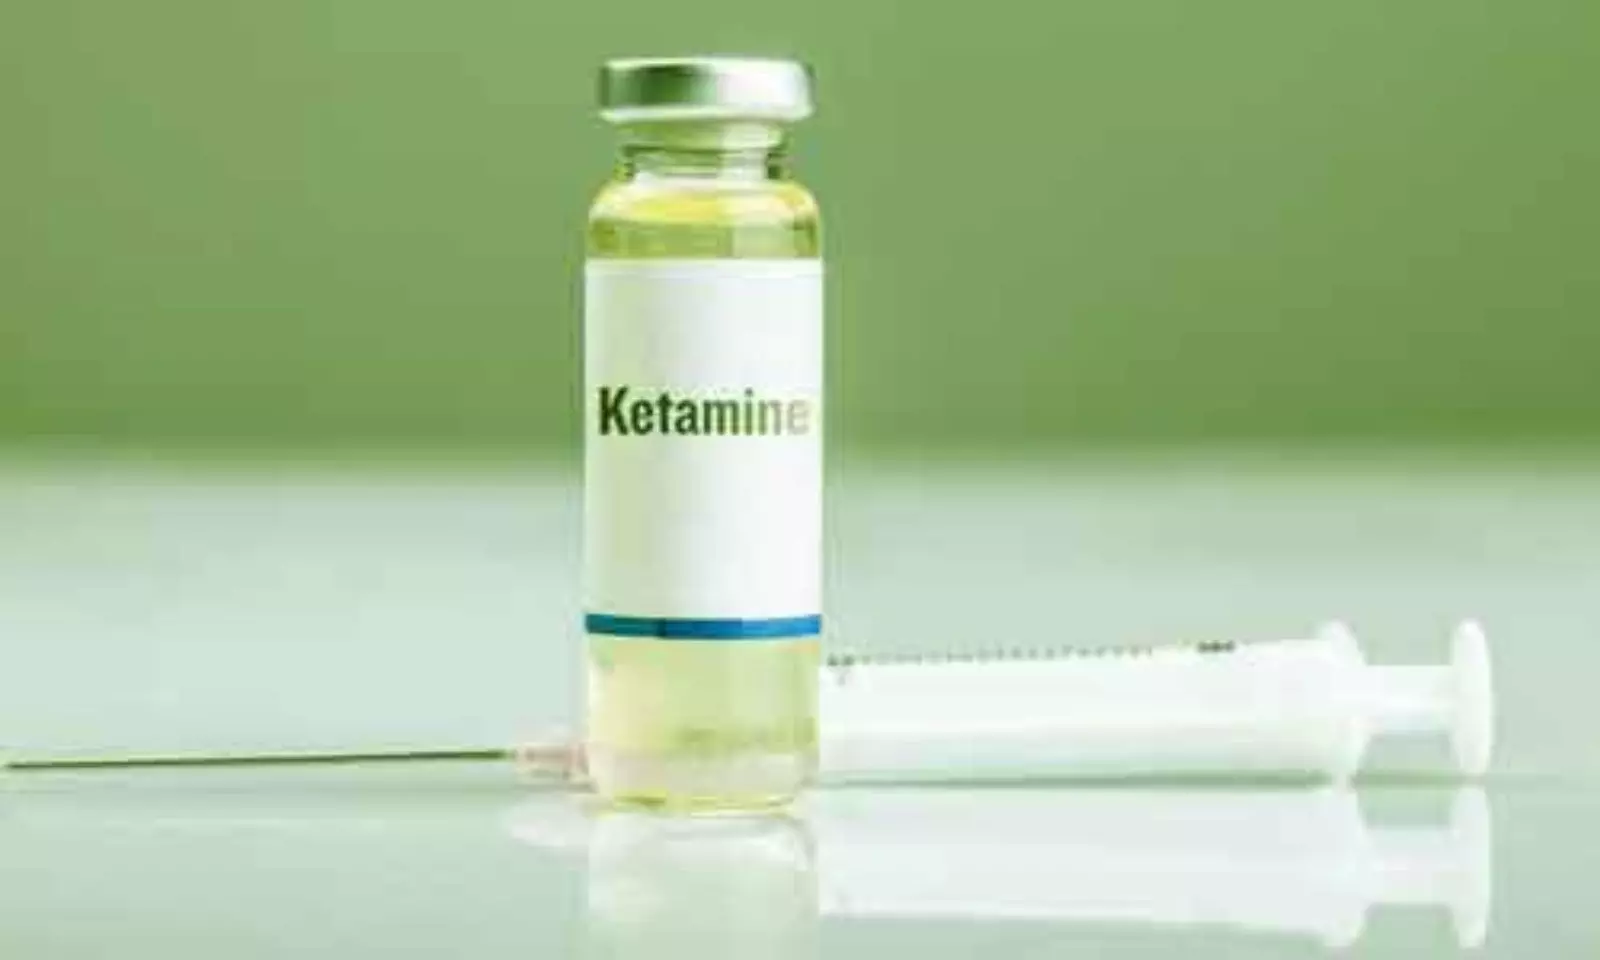 Ketamine short-term effective treatment for some suicidal patients in hospital